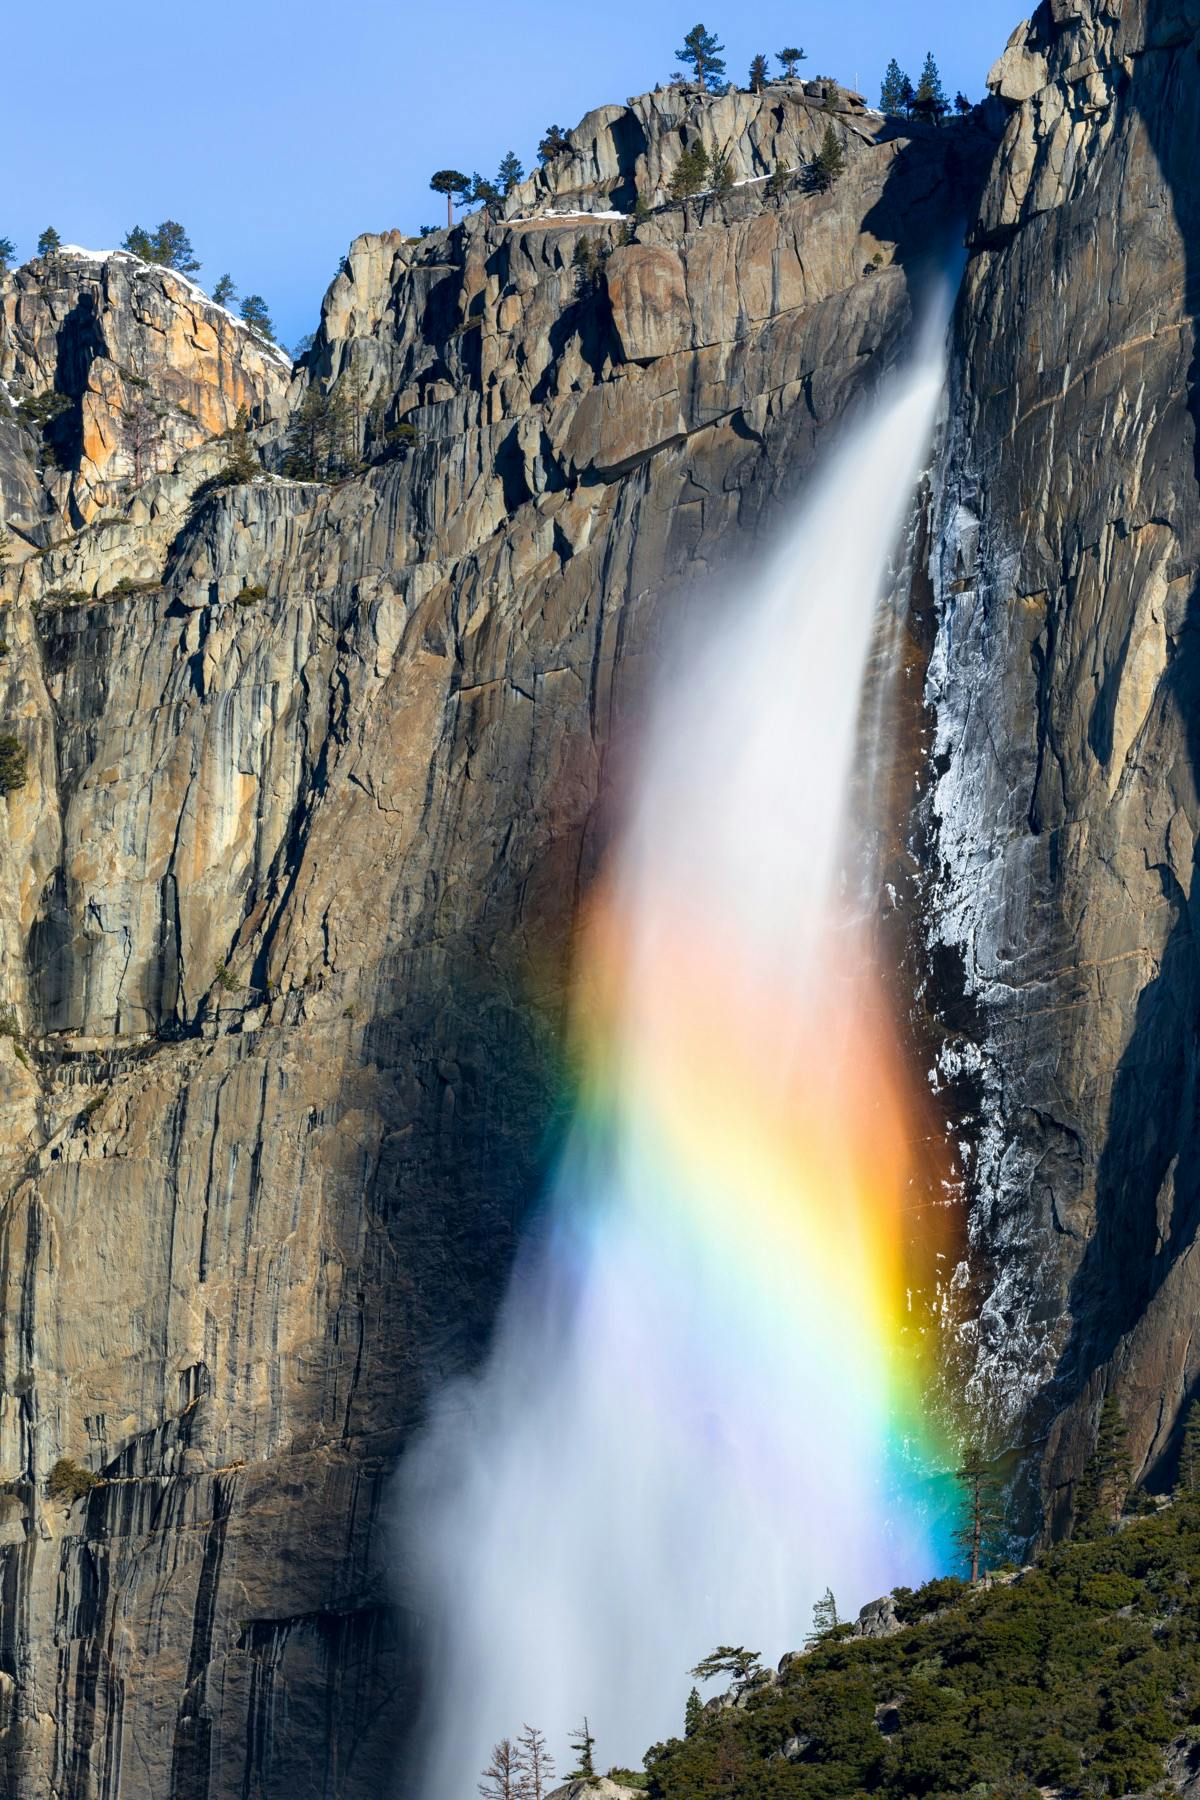 A segment of a rainbow spans across the middle of a flowing waterfall at Yosemite National Park